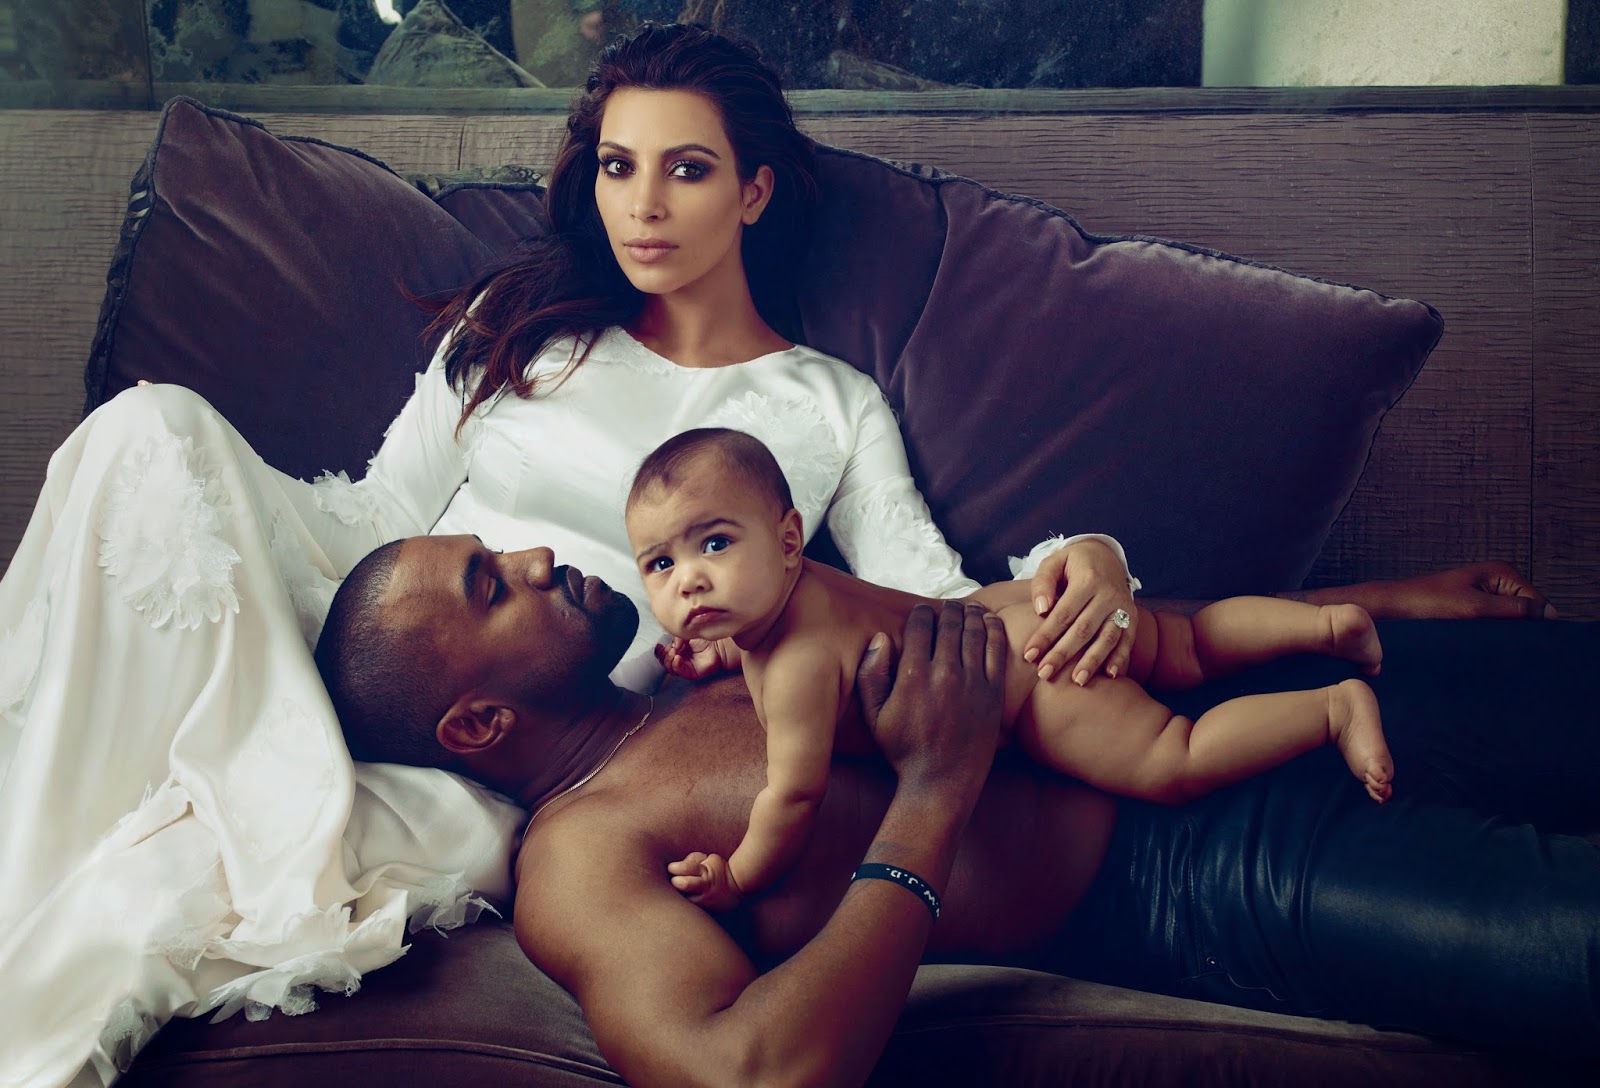 Kim Kardashian and Kanye West Cover Vogue's April 2014 Issue